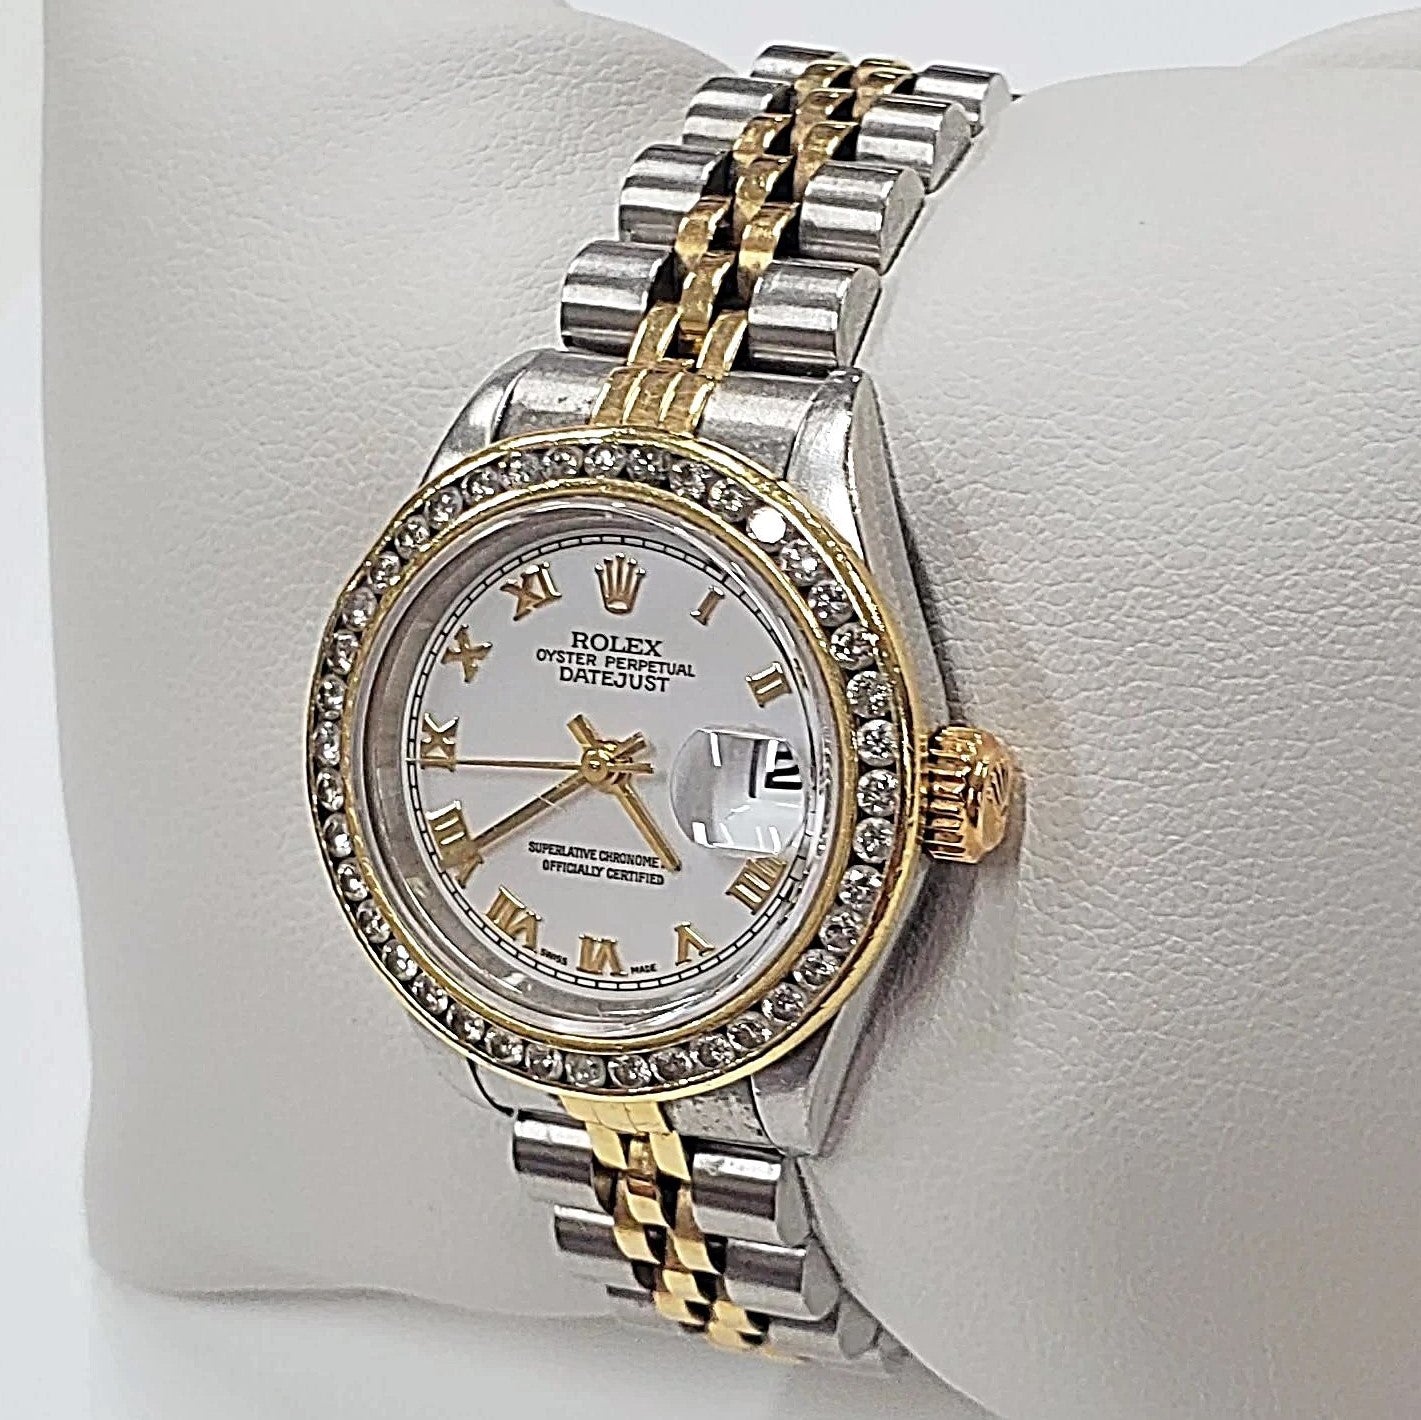 Women's Rolex 18K Gold Two-Tone 26mm DateJust Watch with Diamond Bezel, White Dial and Roman Numerals. (Pre-Owned)